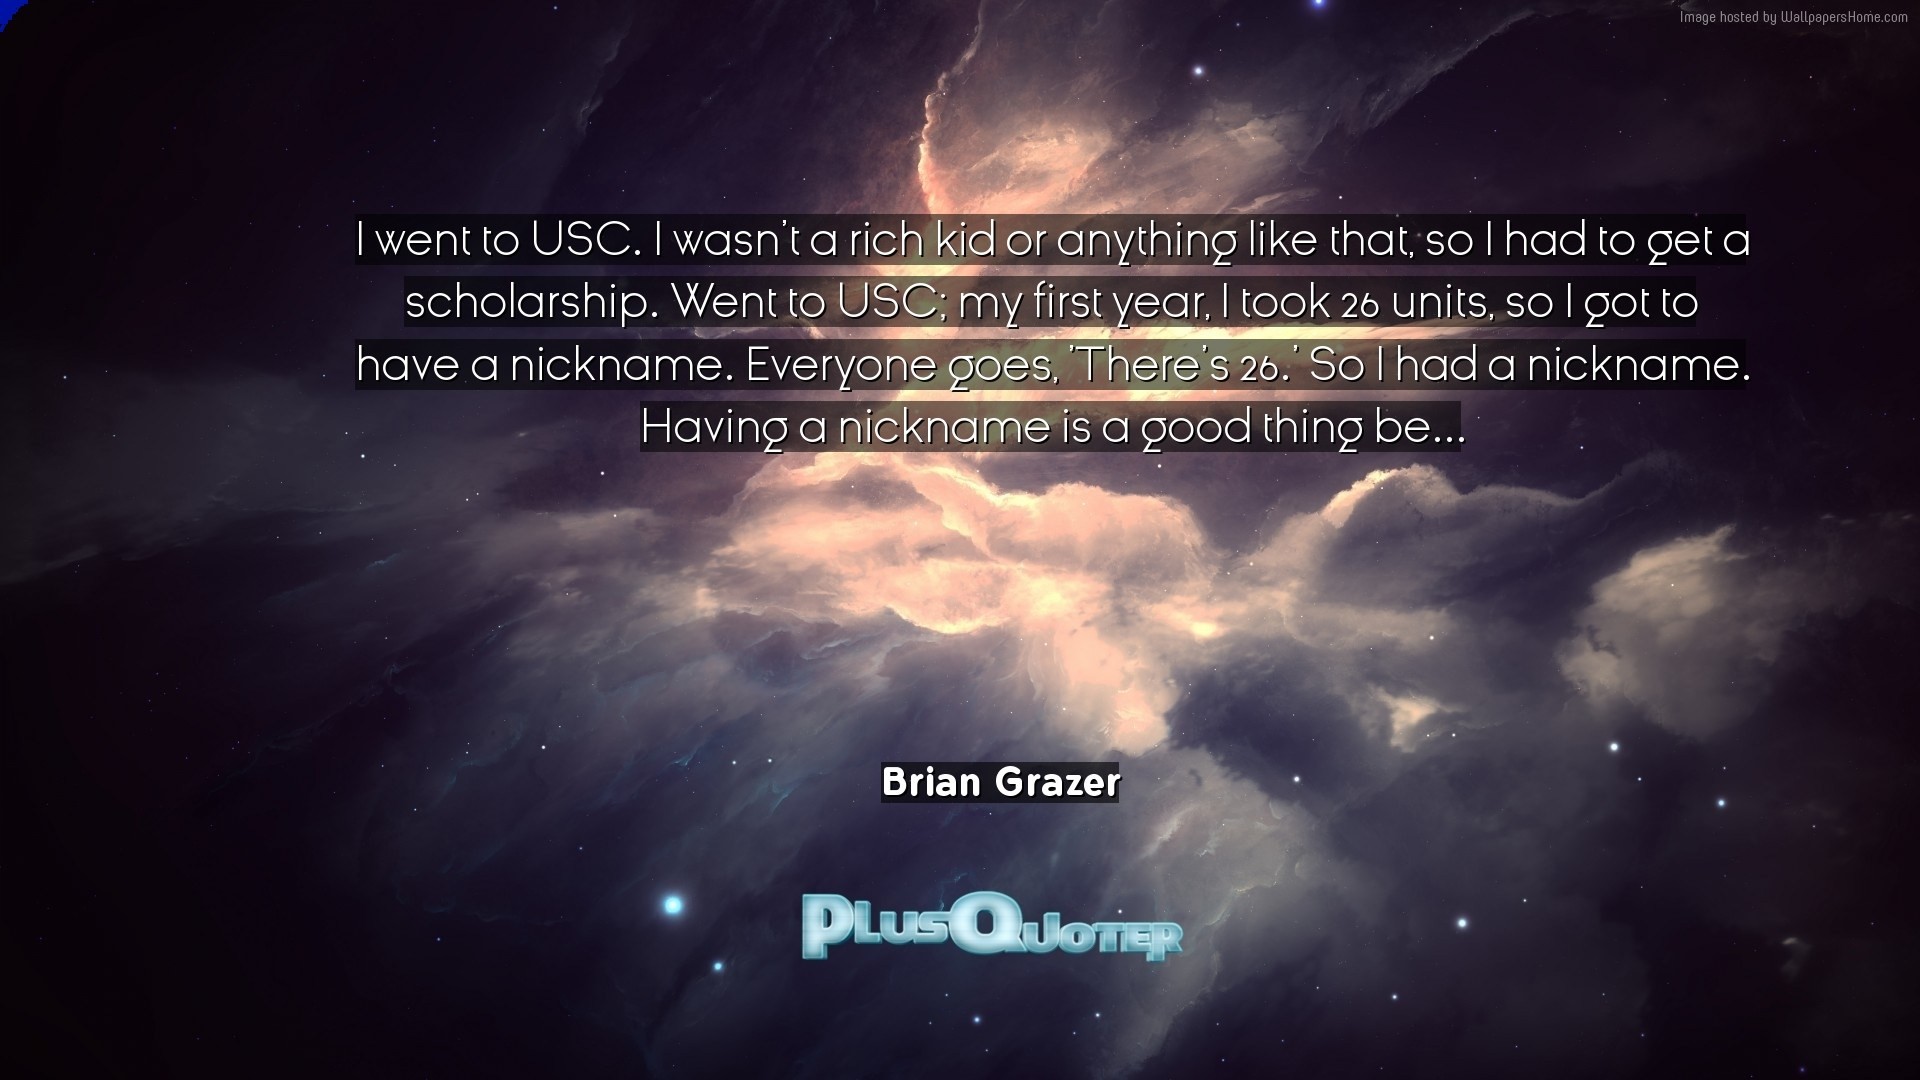 1920x1080 Download Wallpaper with inspirational Quotes- "I went to USC. I wasn